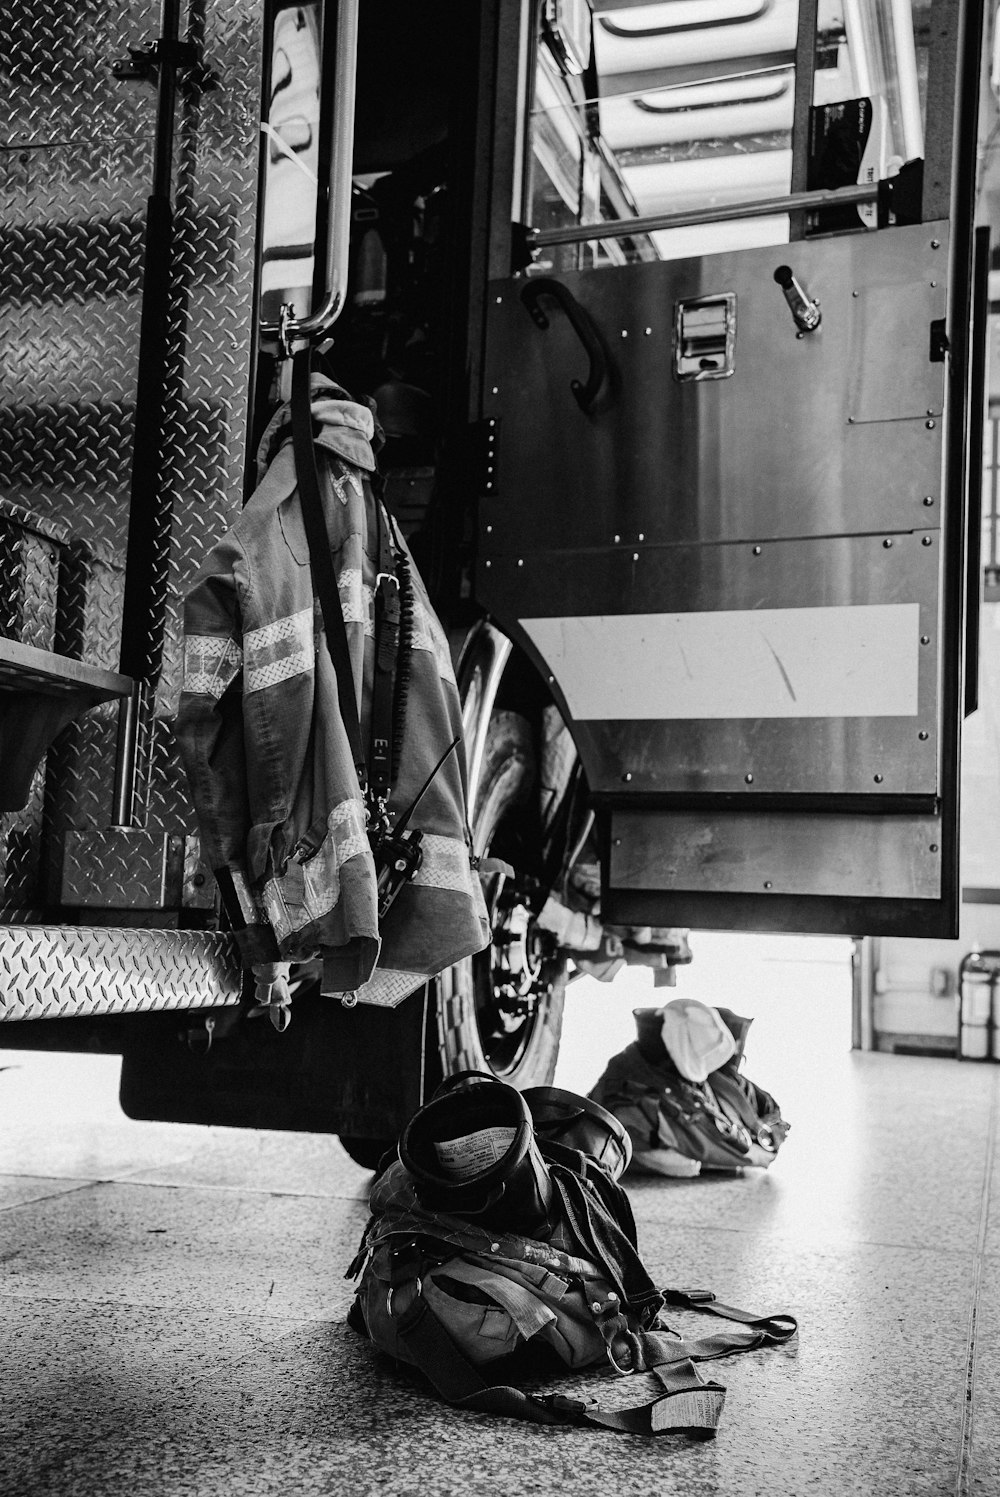 a black and white photo of a fire truck with a fireman's gear